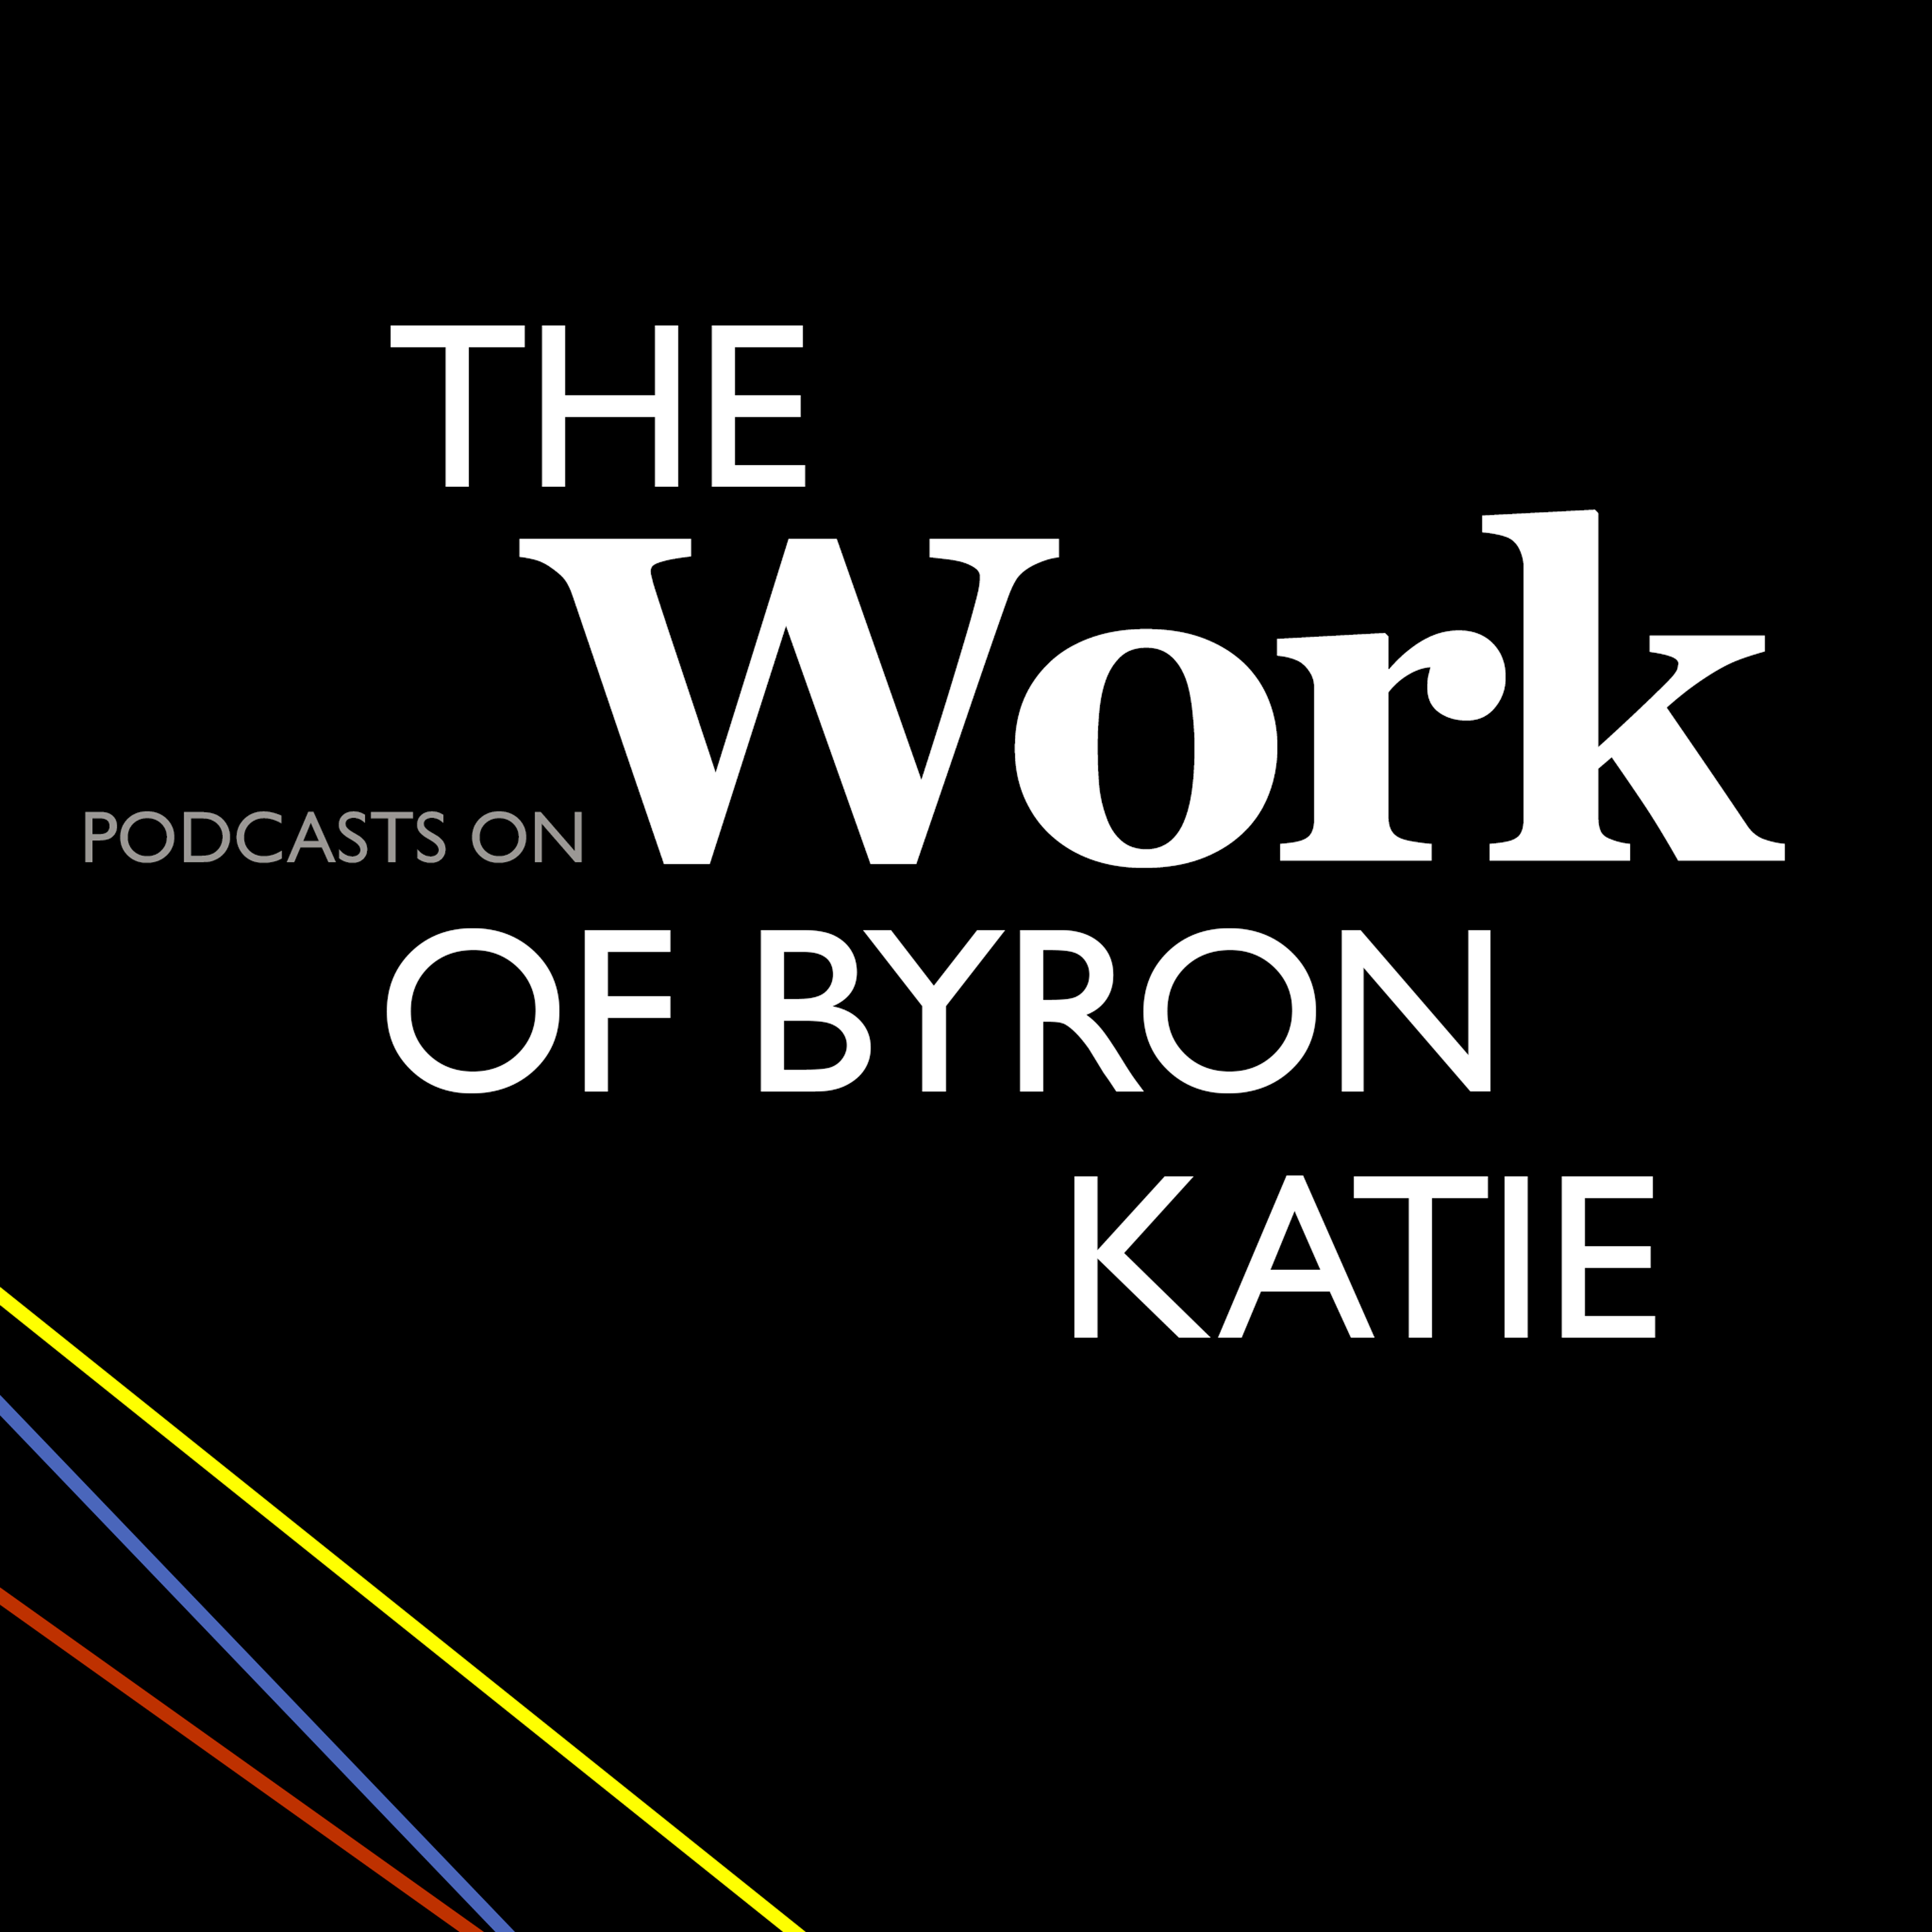 Podcasts on The Work of Byron Katie